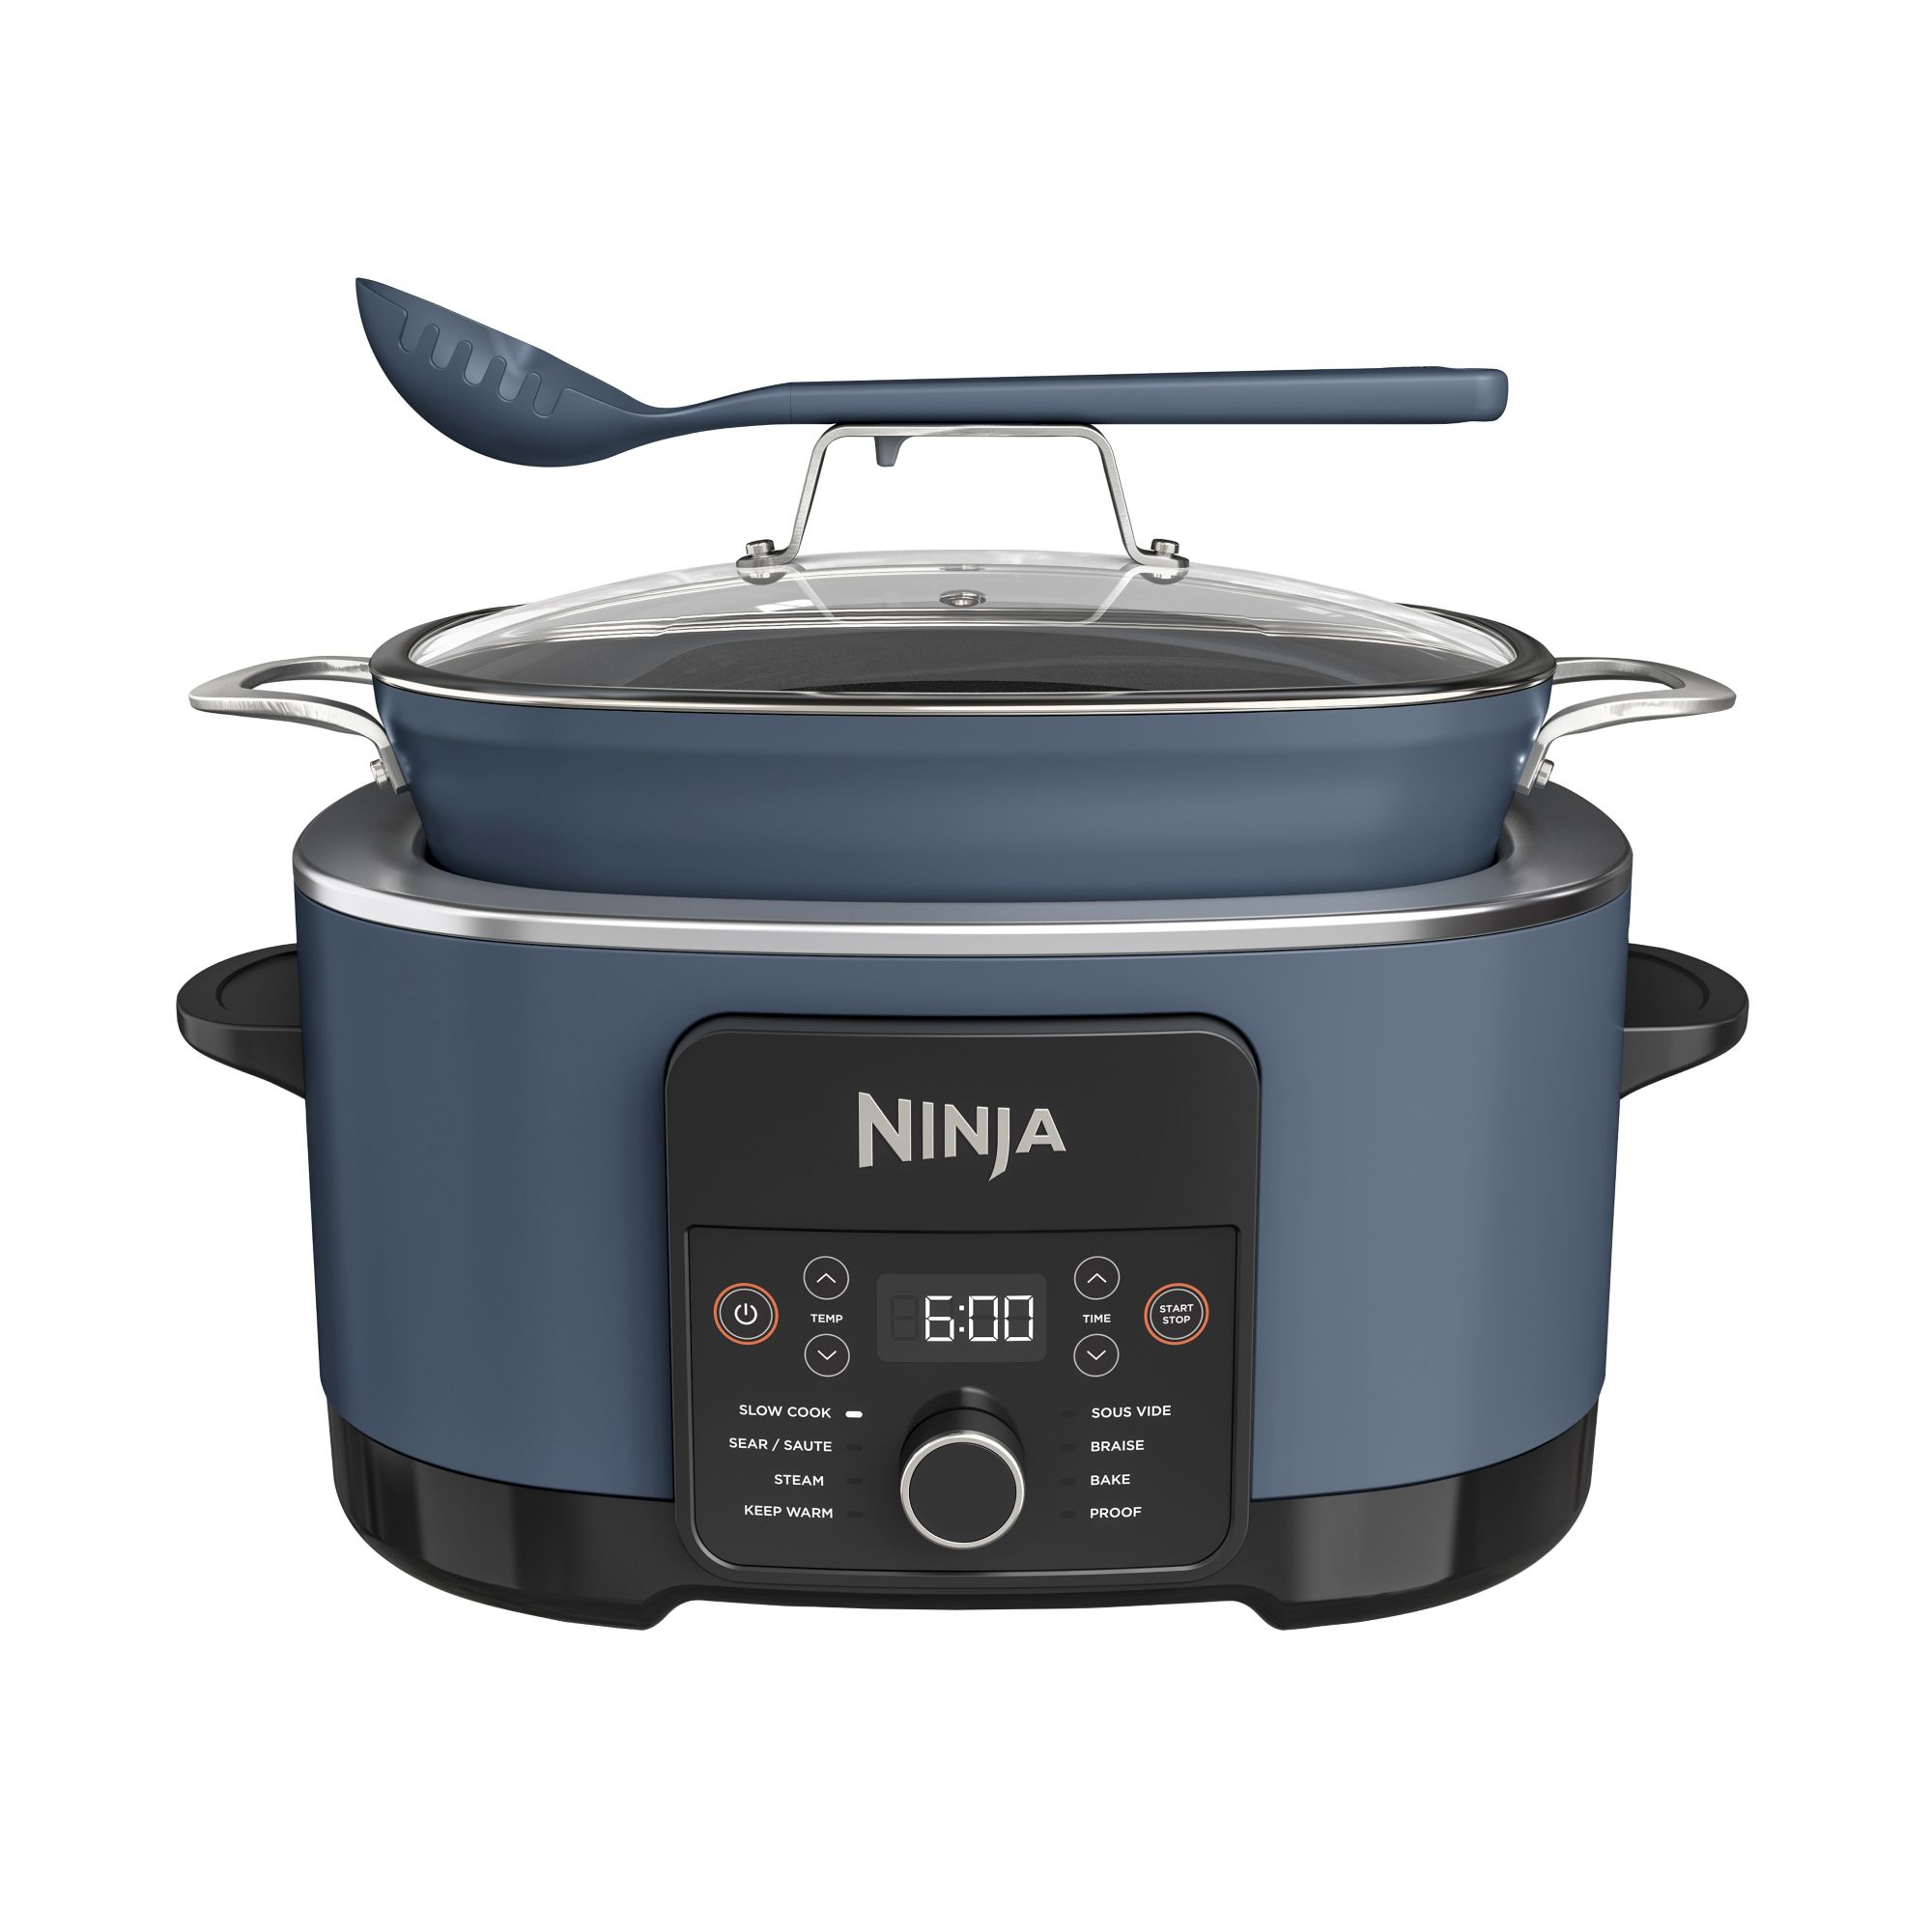 Shoppers Can't Get Enough Of This Mini Electric Crockpot